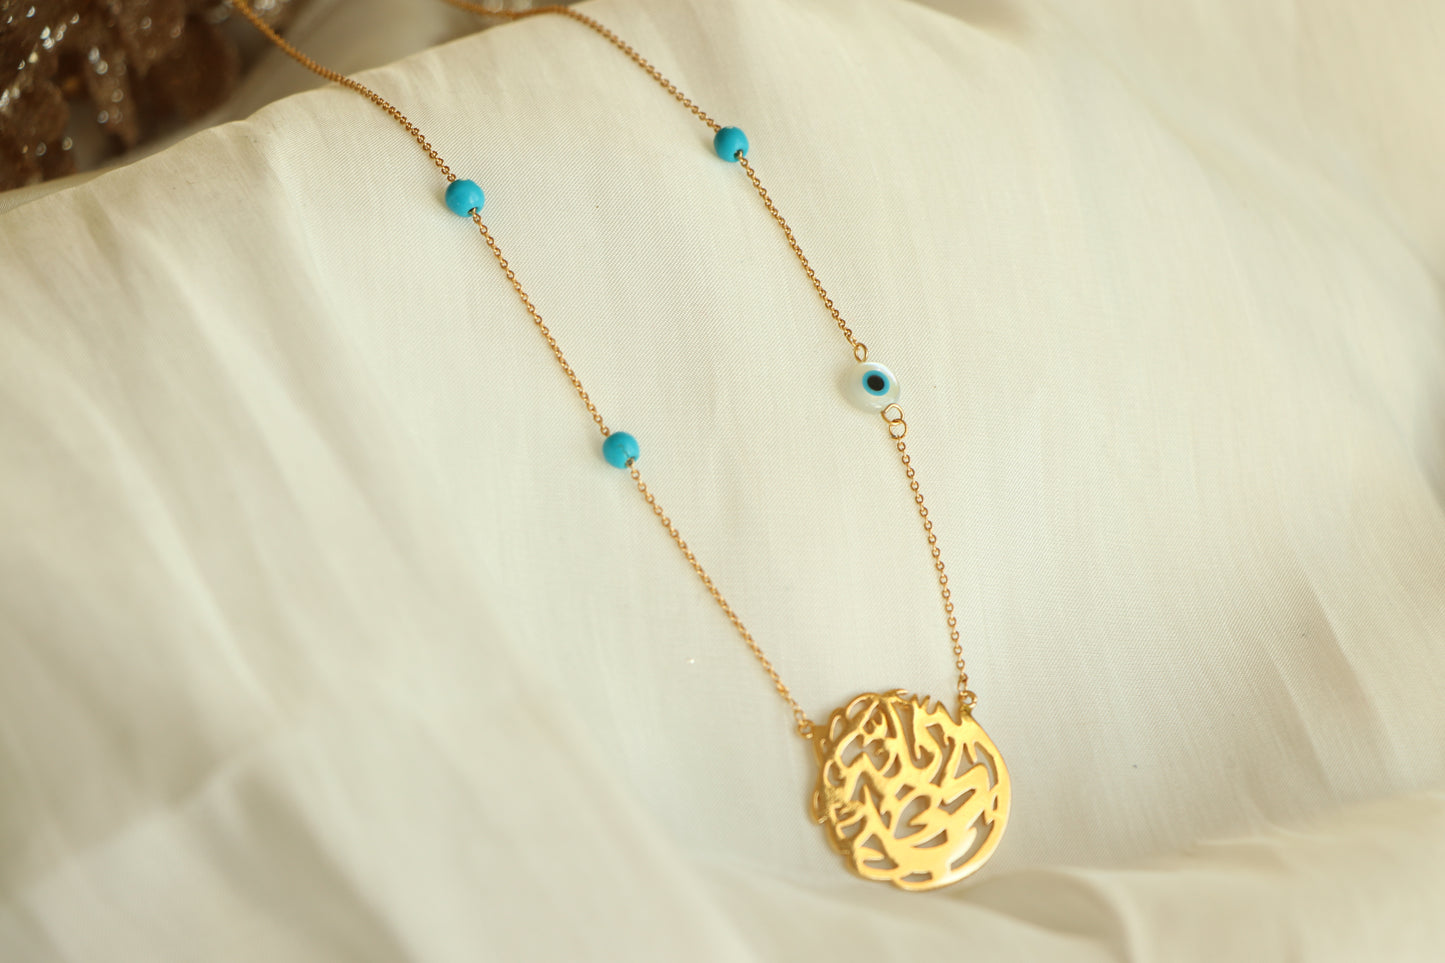 Necklace (ALHAMDULILLAH) THANK GOD Word In Arabic Calligraphy with blue beads